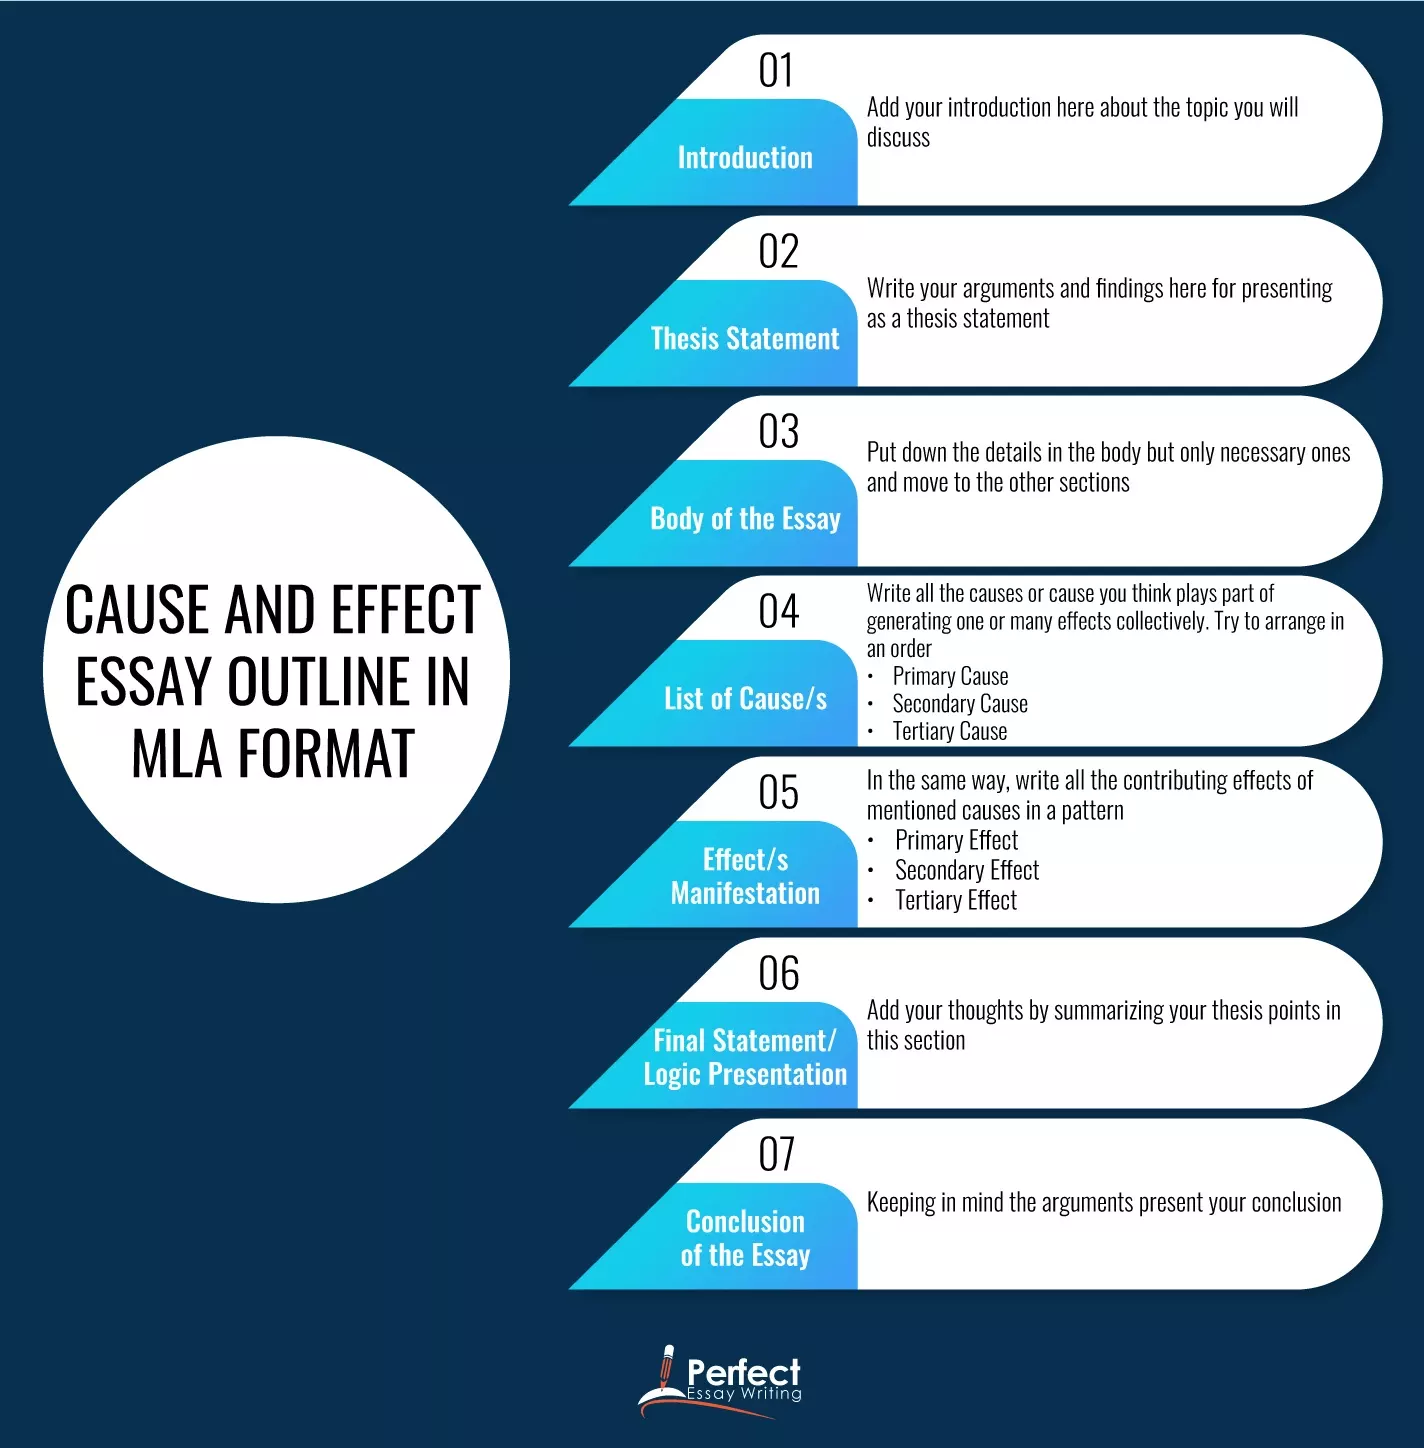 Cause and Effect Essay Outline In MLA Format